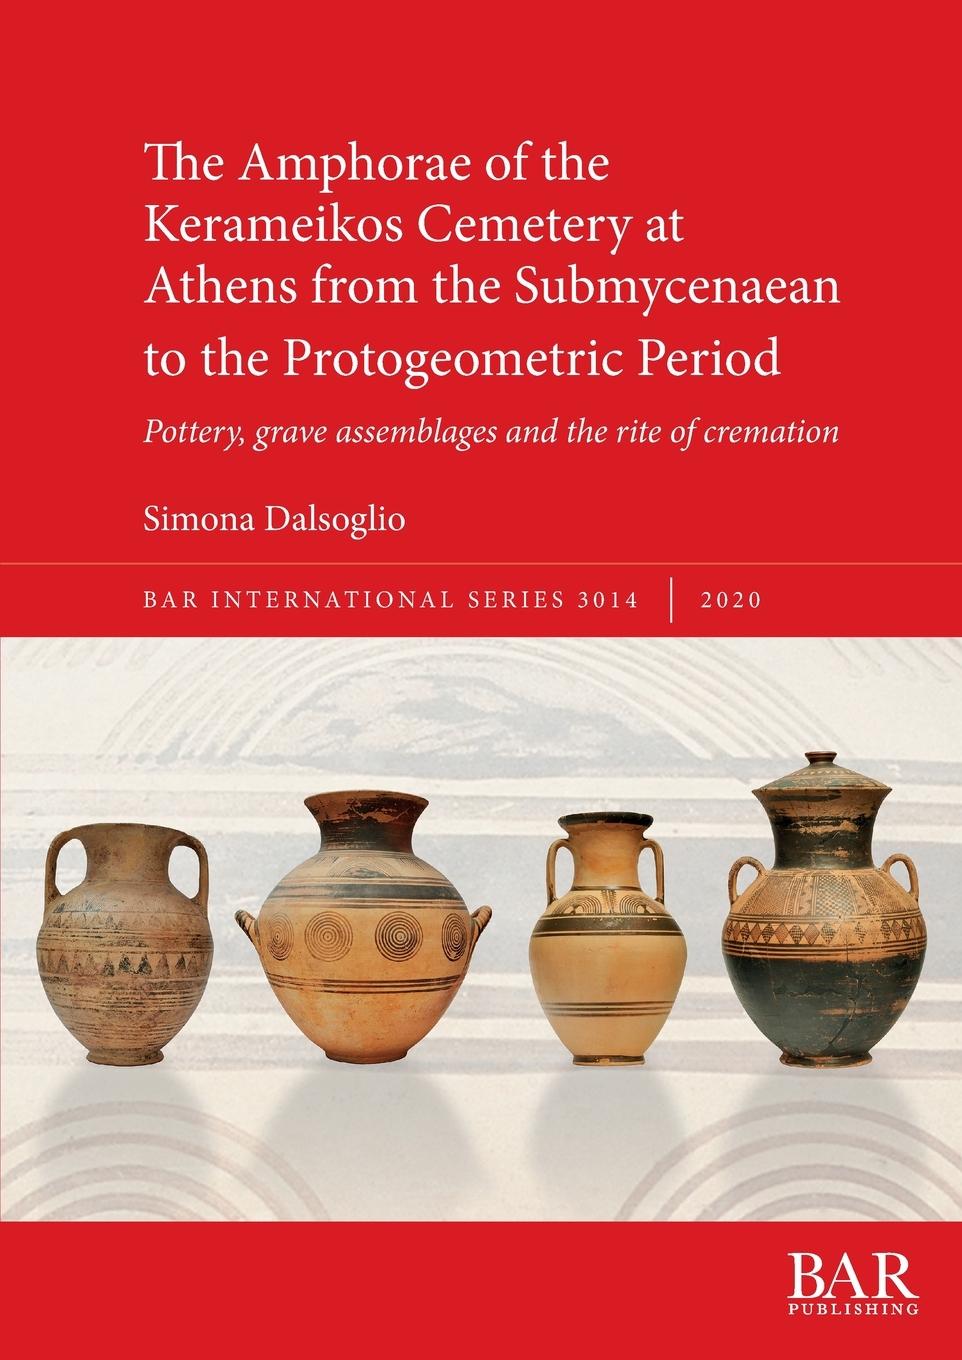 Book Amphorae of the Kerameikos Cemetery at Athens from the Submycenaean to the Protogeometric Period 